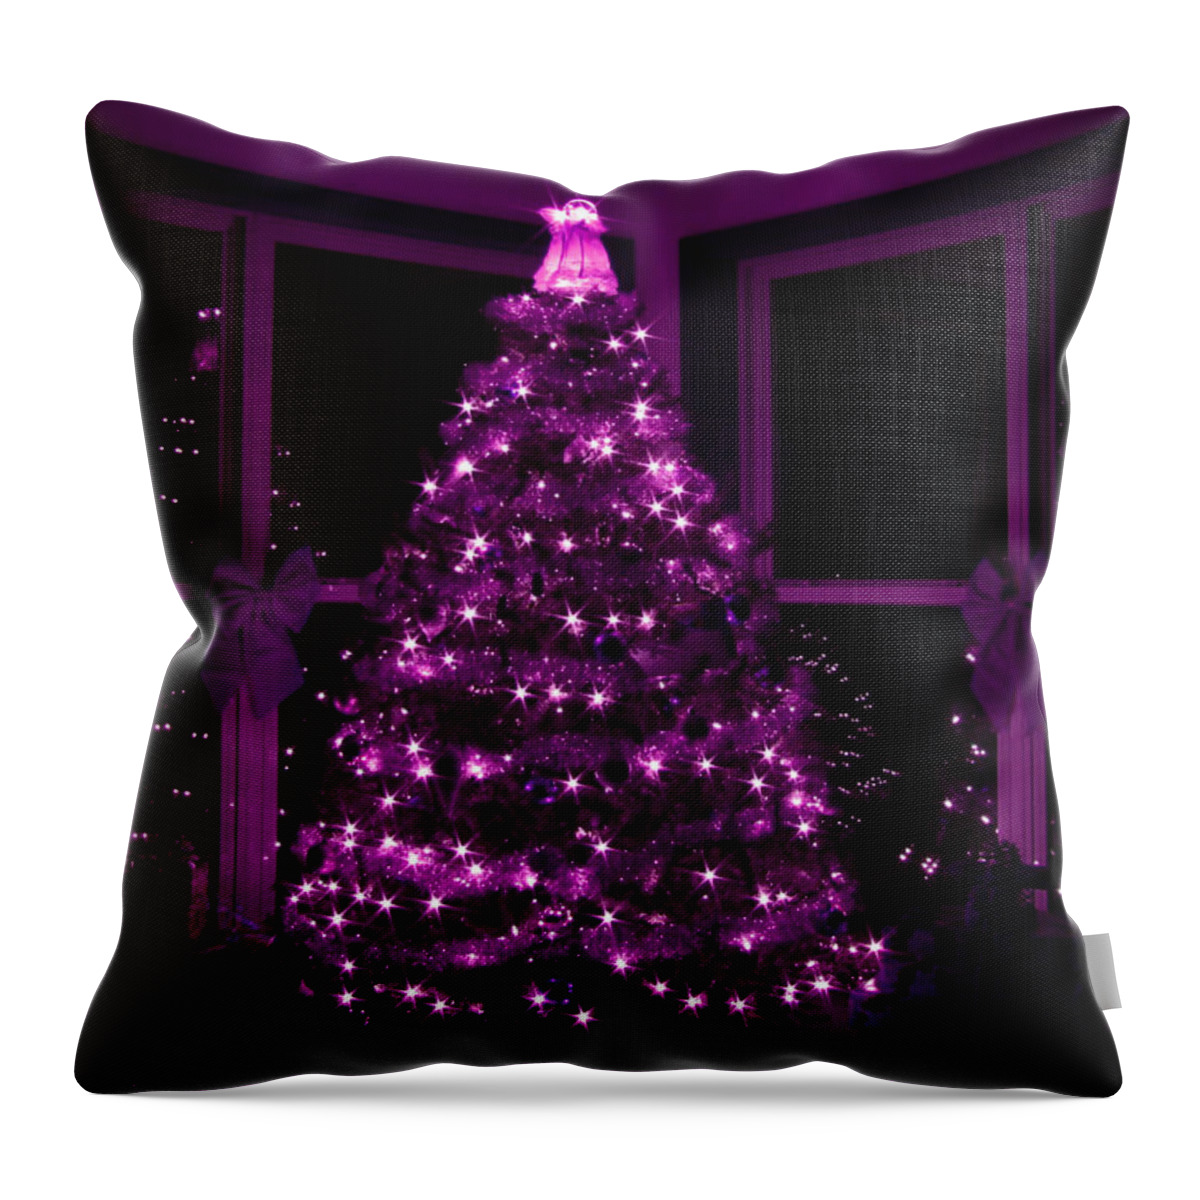 Christmas Throw Pillow featuring the photograph Purple Christmas by Lori Deiter